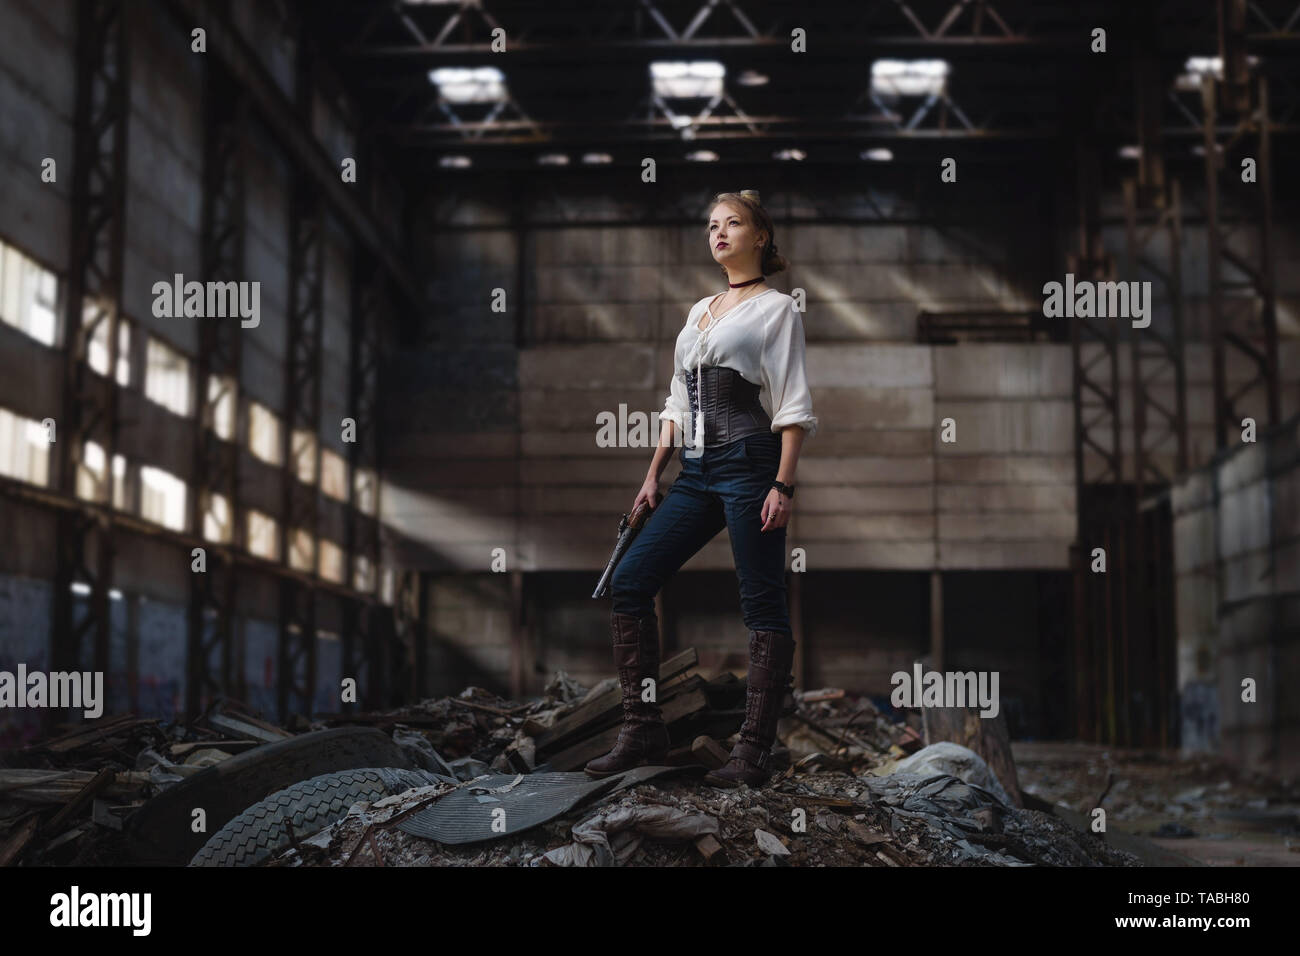 girl in a steampunk costume at an abandoned factory Stock Photo